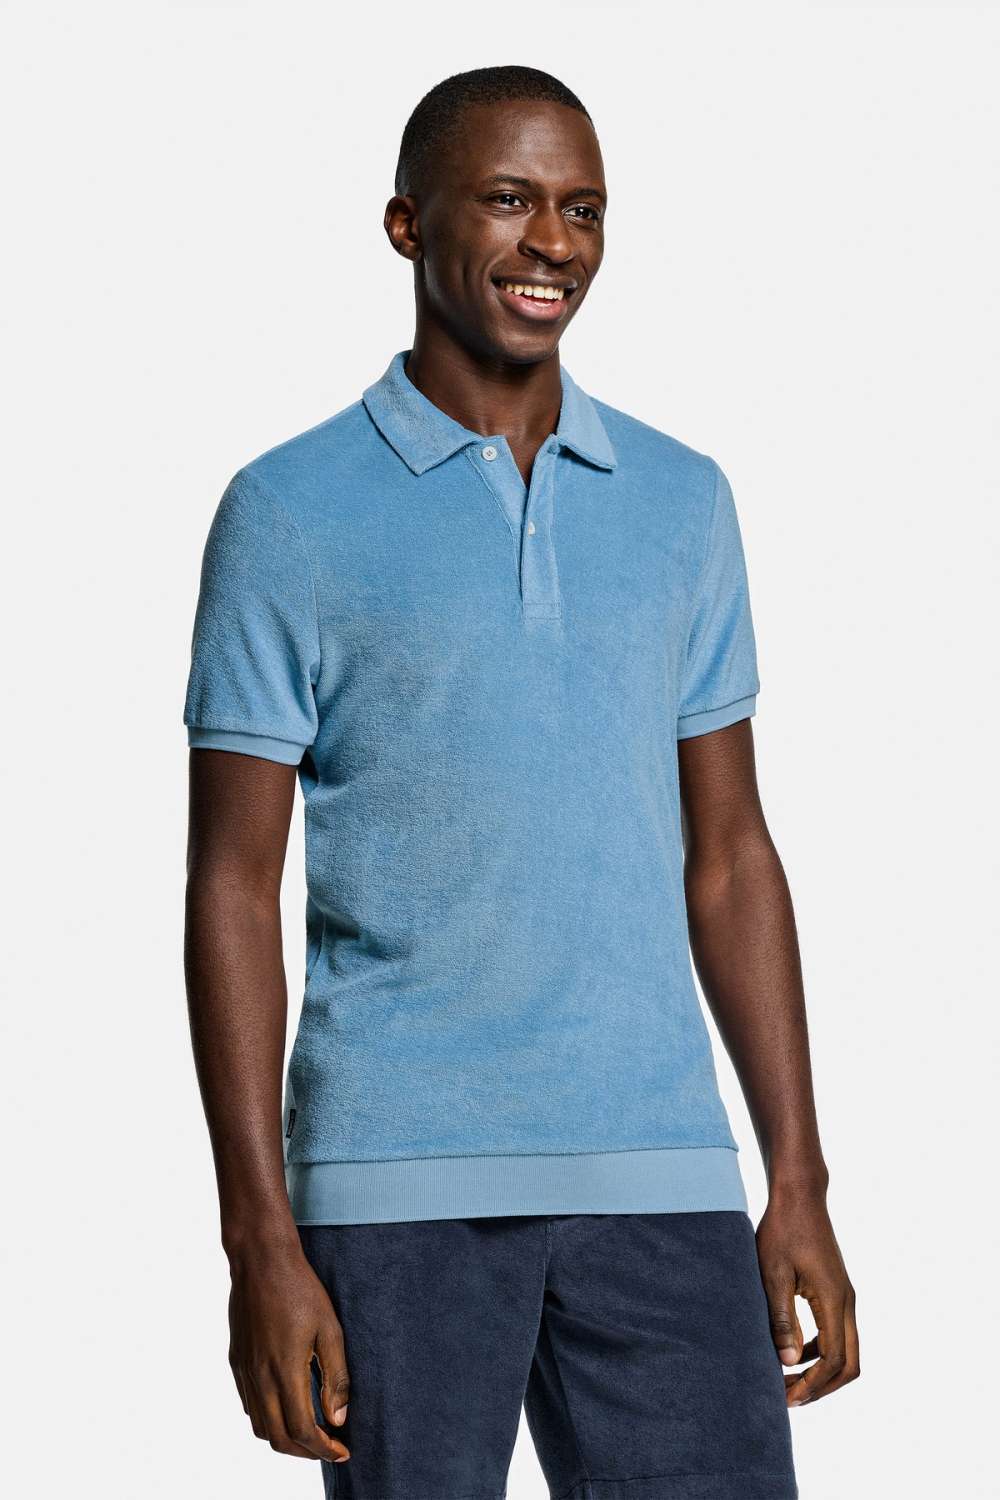 Boulevards * The Terry Polo